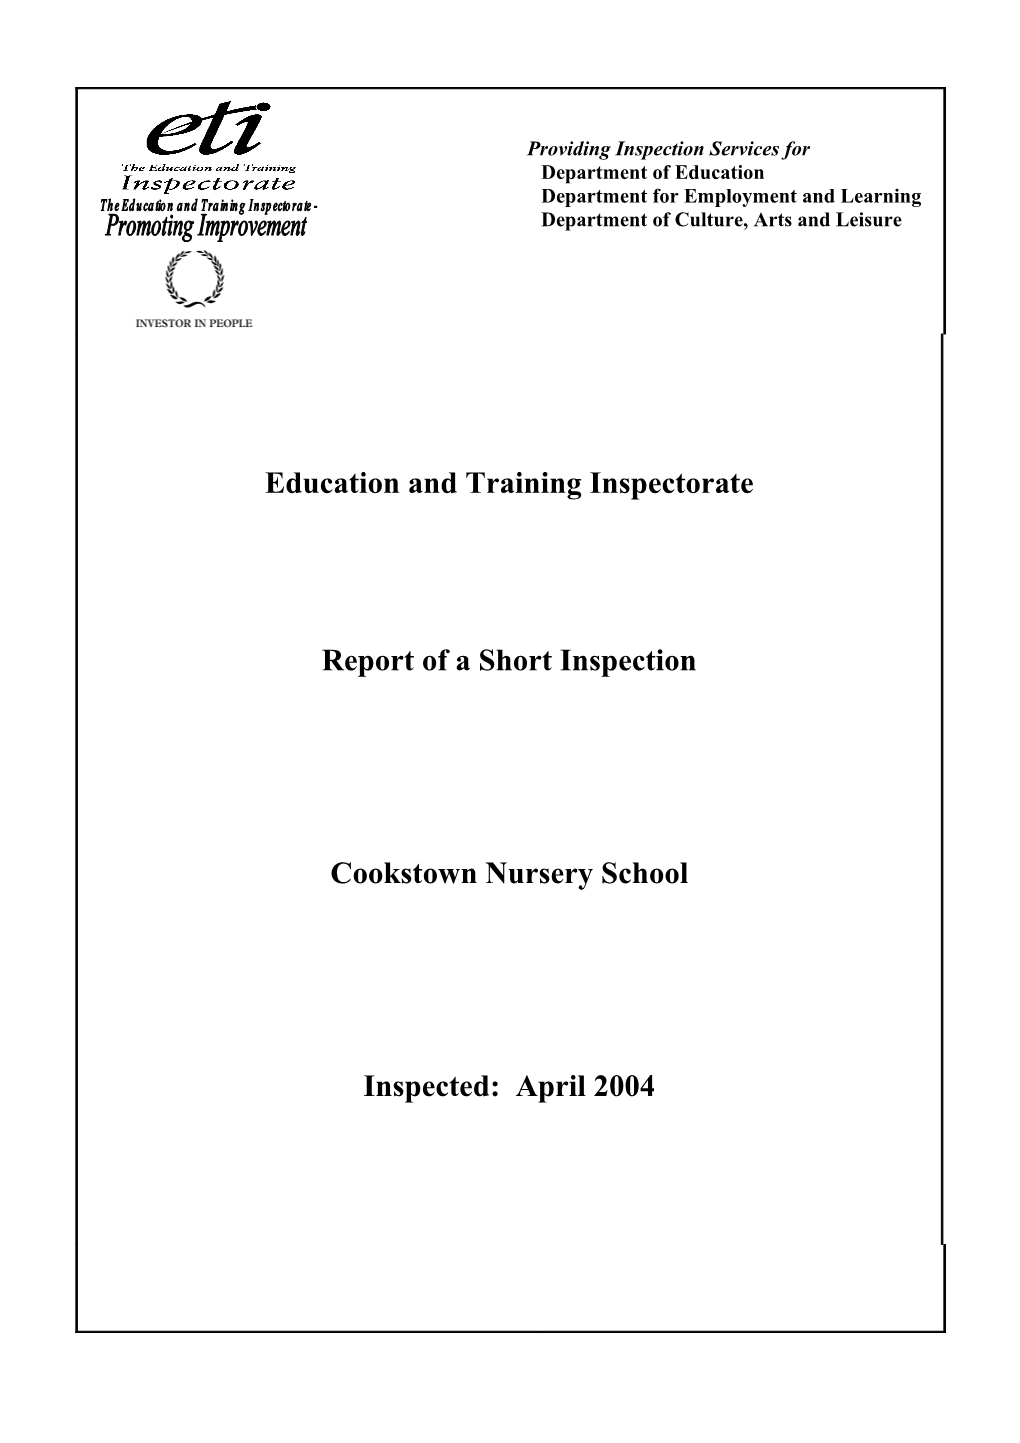 Report on the Inspection of Cookstown Nursery School, County Tyrone